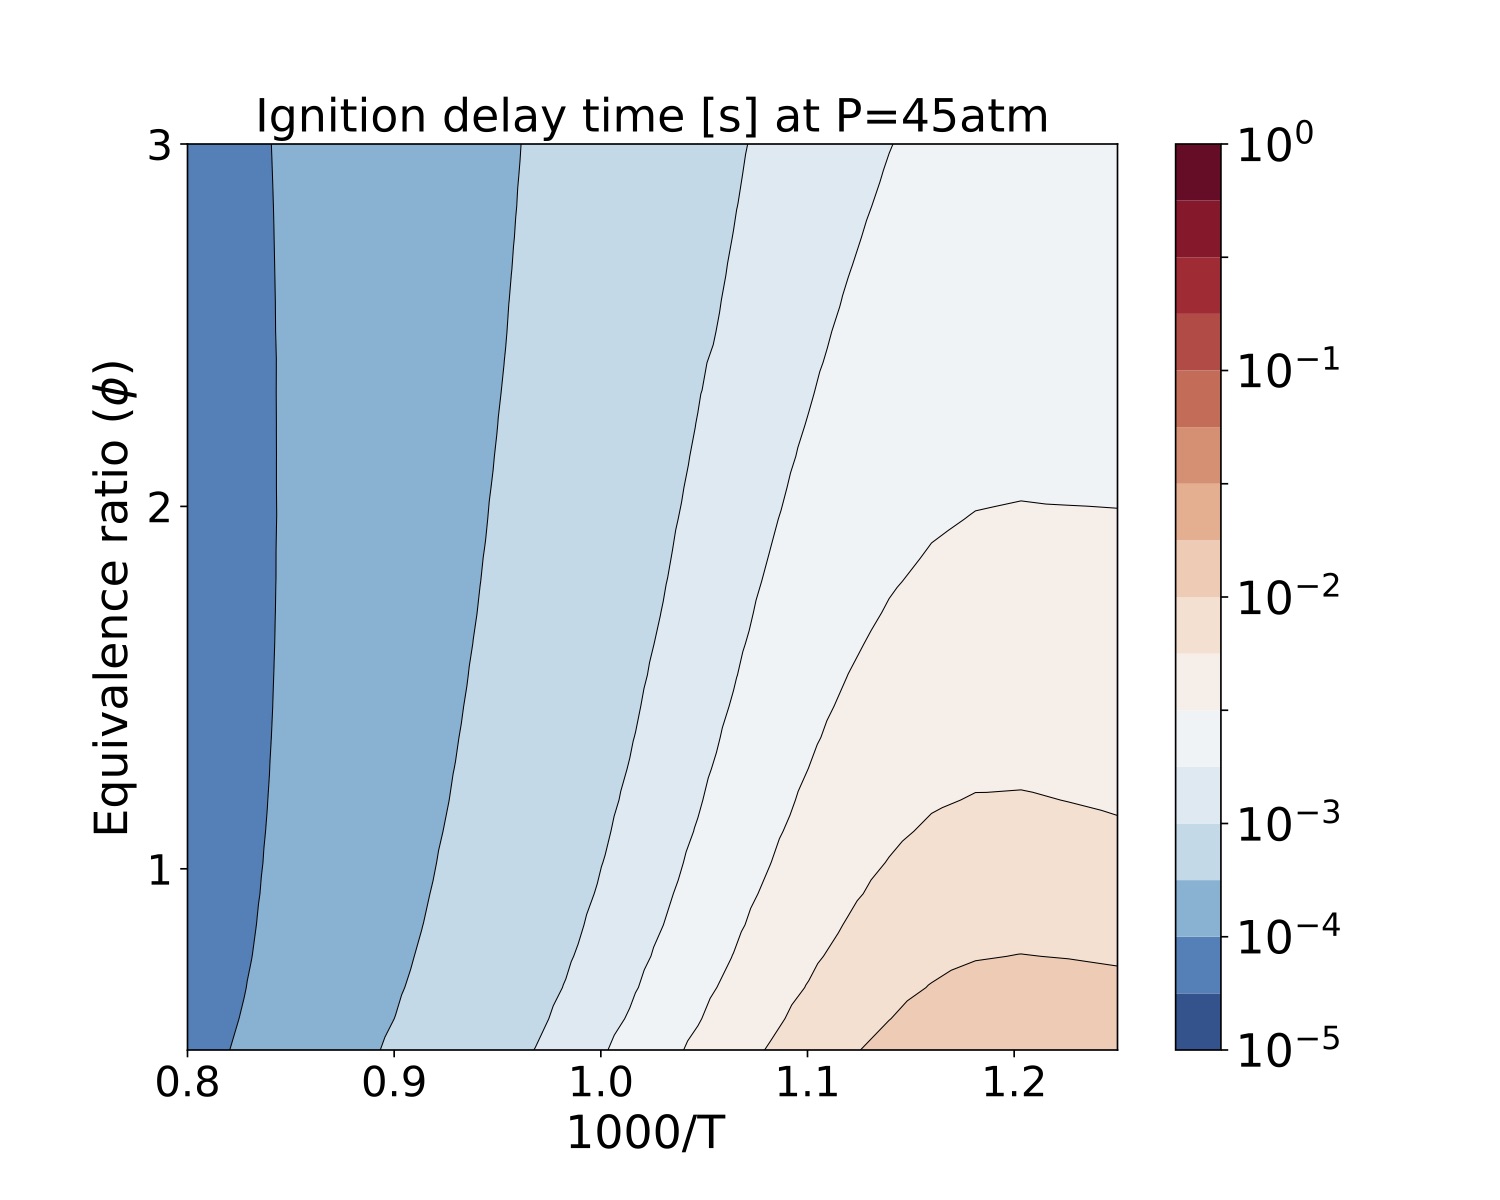 Ignition delay time (s) of isooctane at 45 atm